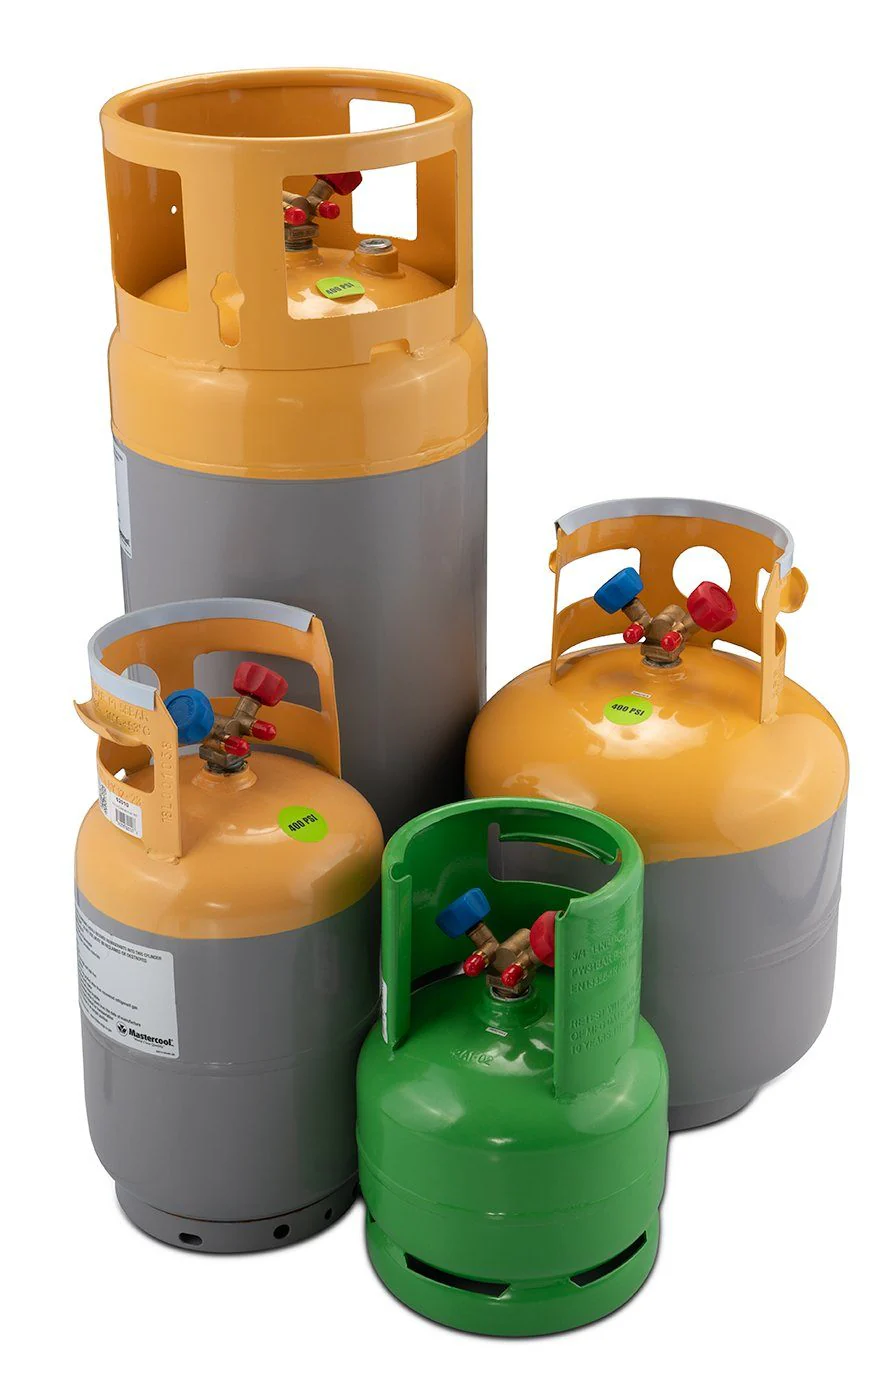 Can these tanks be converted to propane?